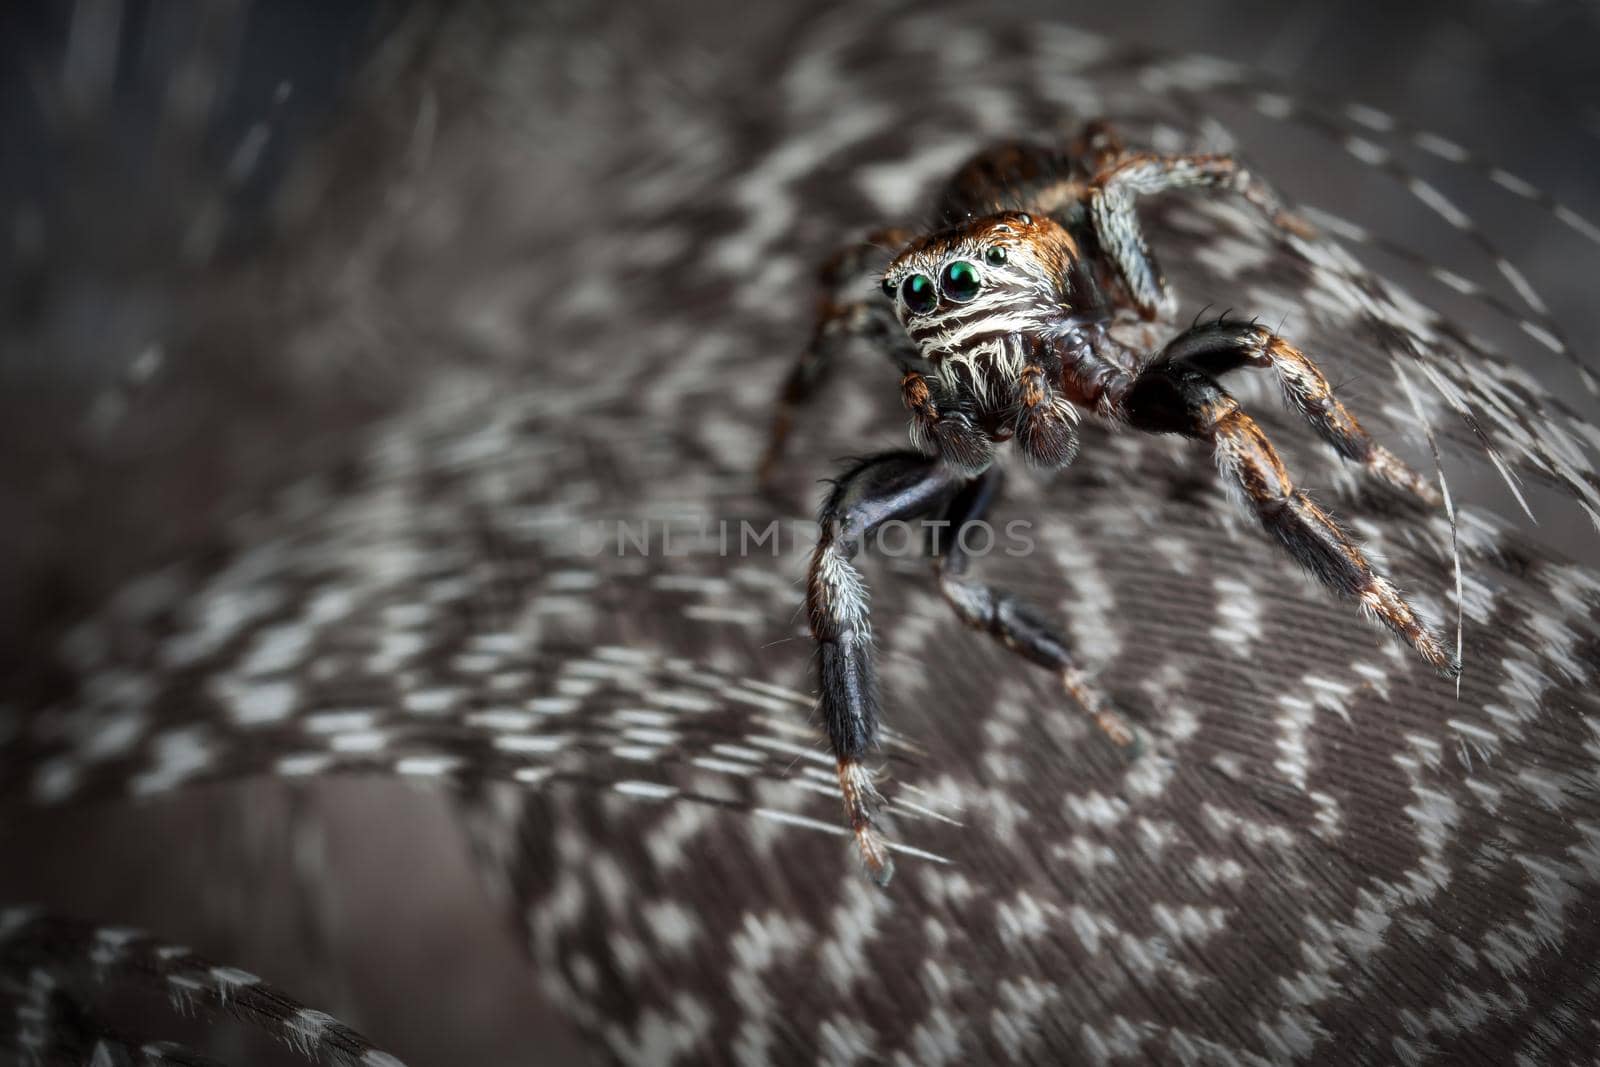 Jumping spider raging on the gray variegated feathers